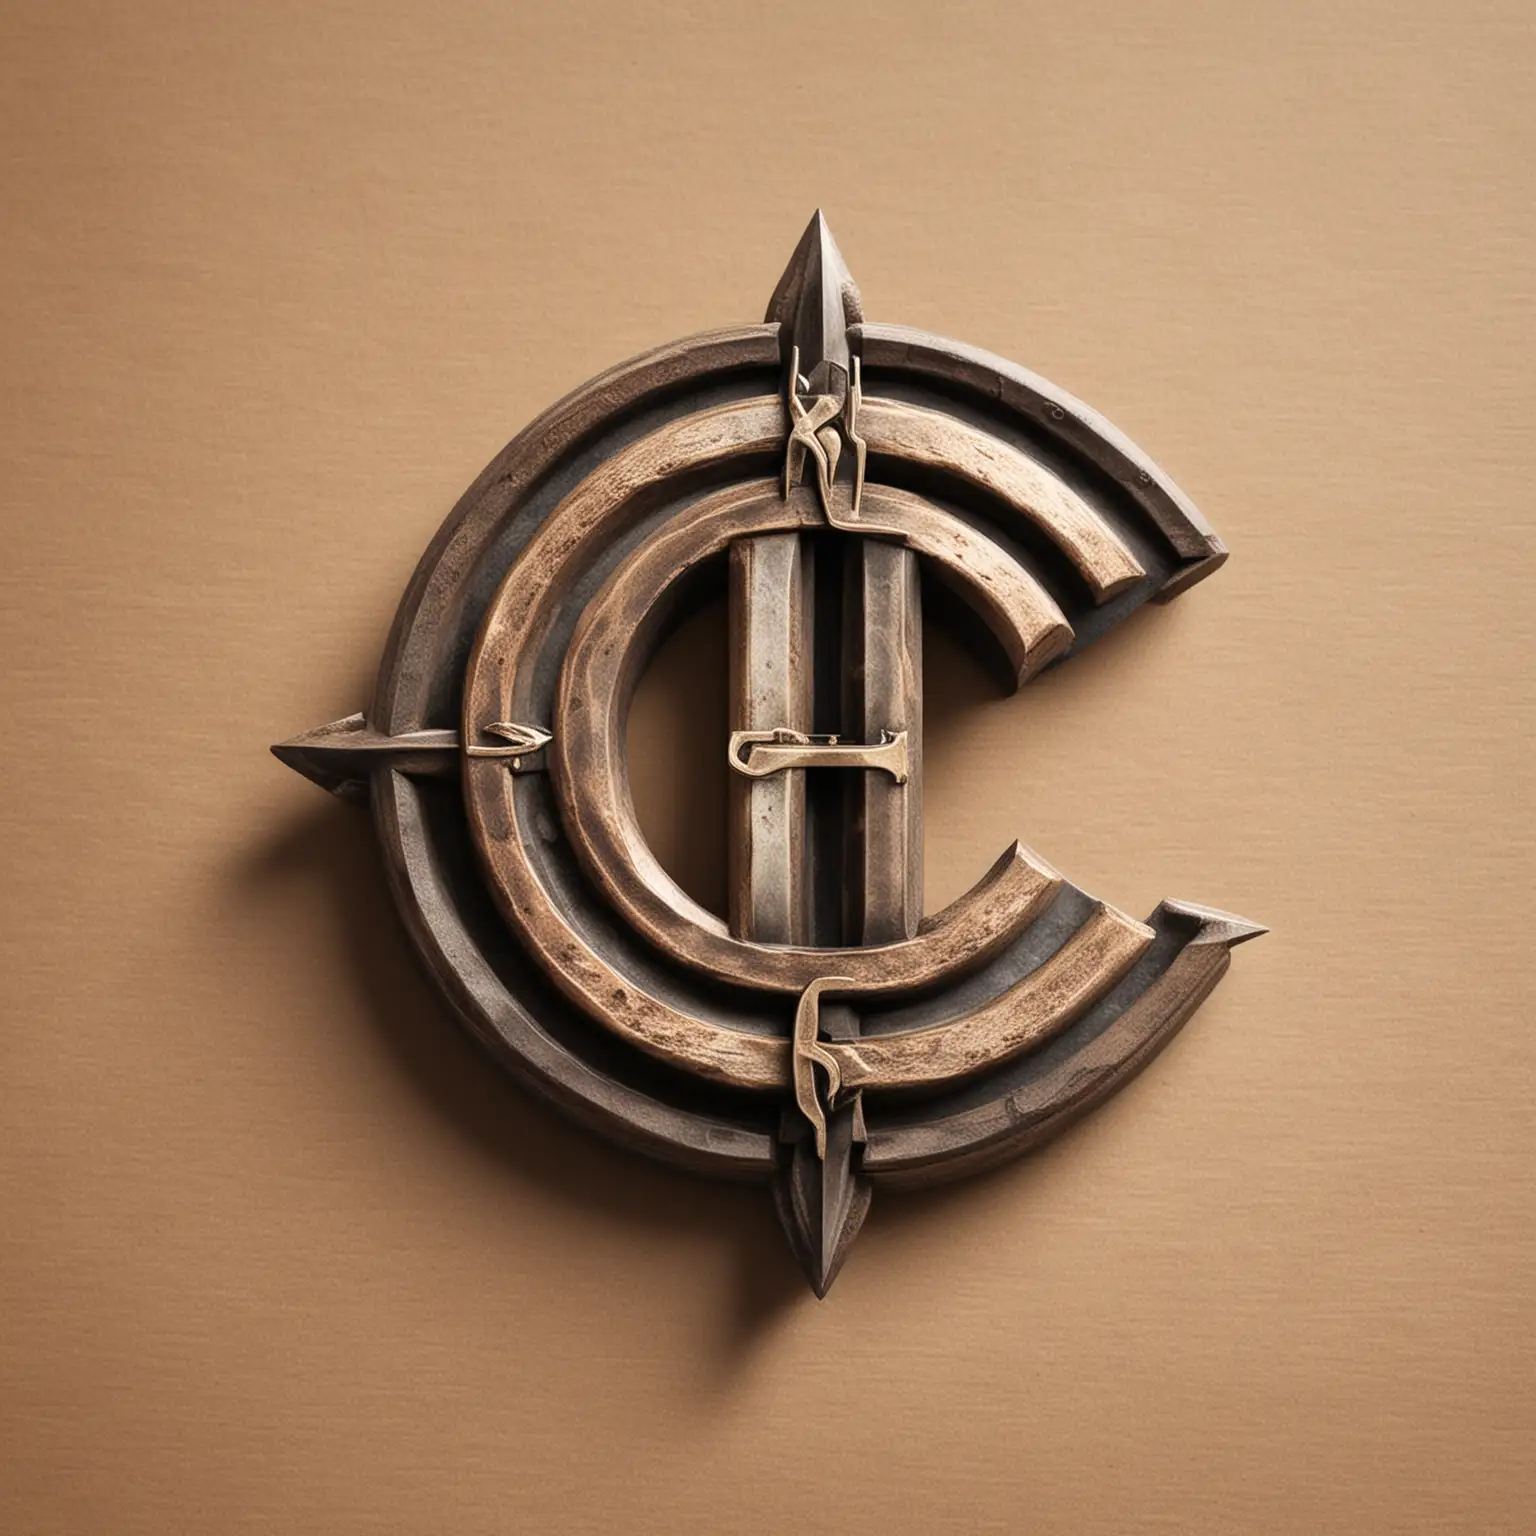 Create a logo using the following letters "CC", using a spur from a boot.
